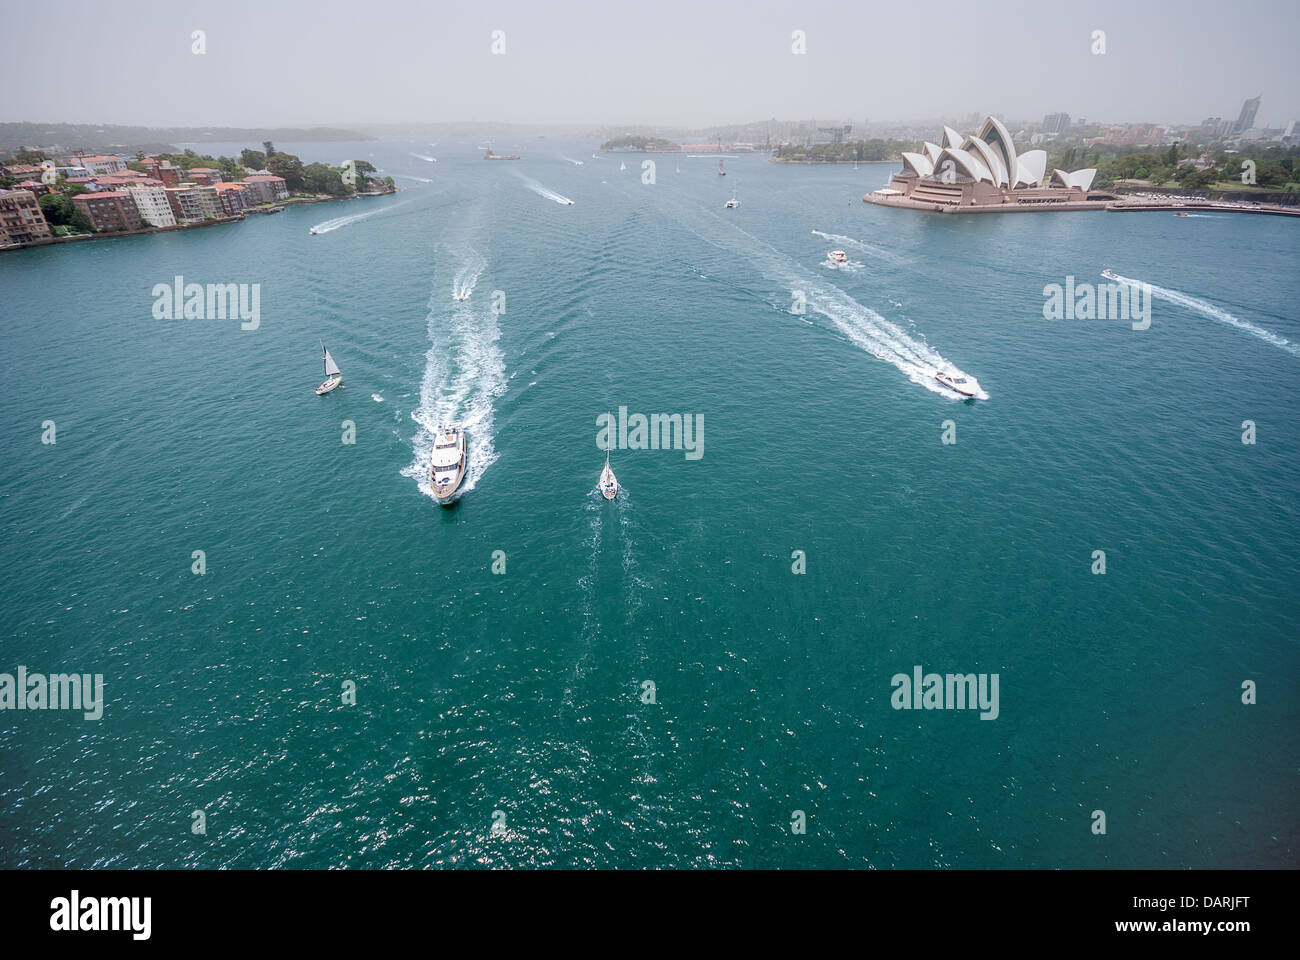 Ferries pass by the majestic Sydney Opera House in busy Sydney Harbour. Stock Photo